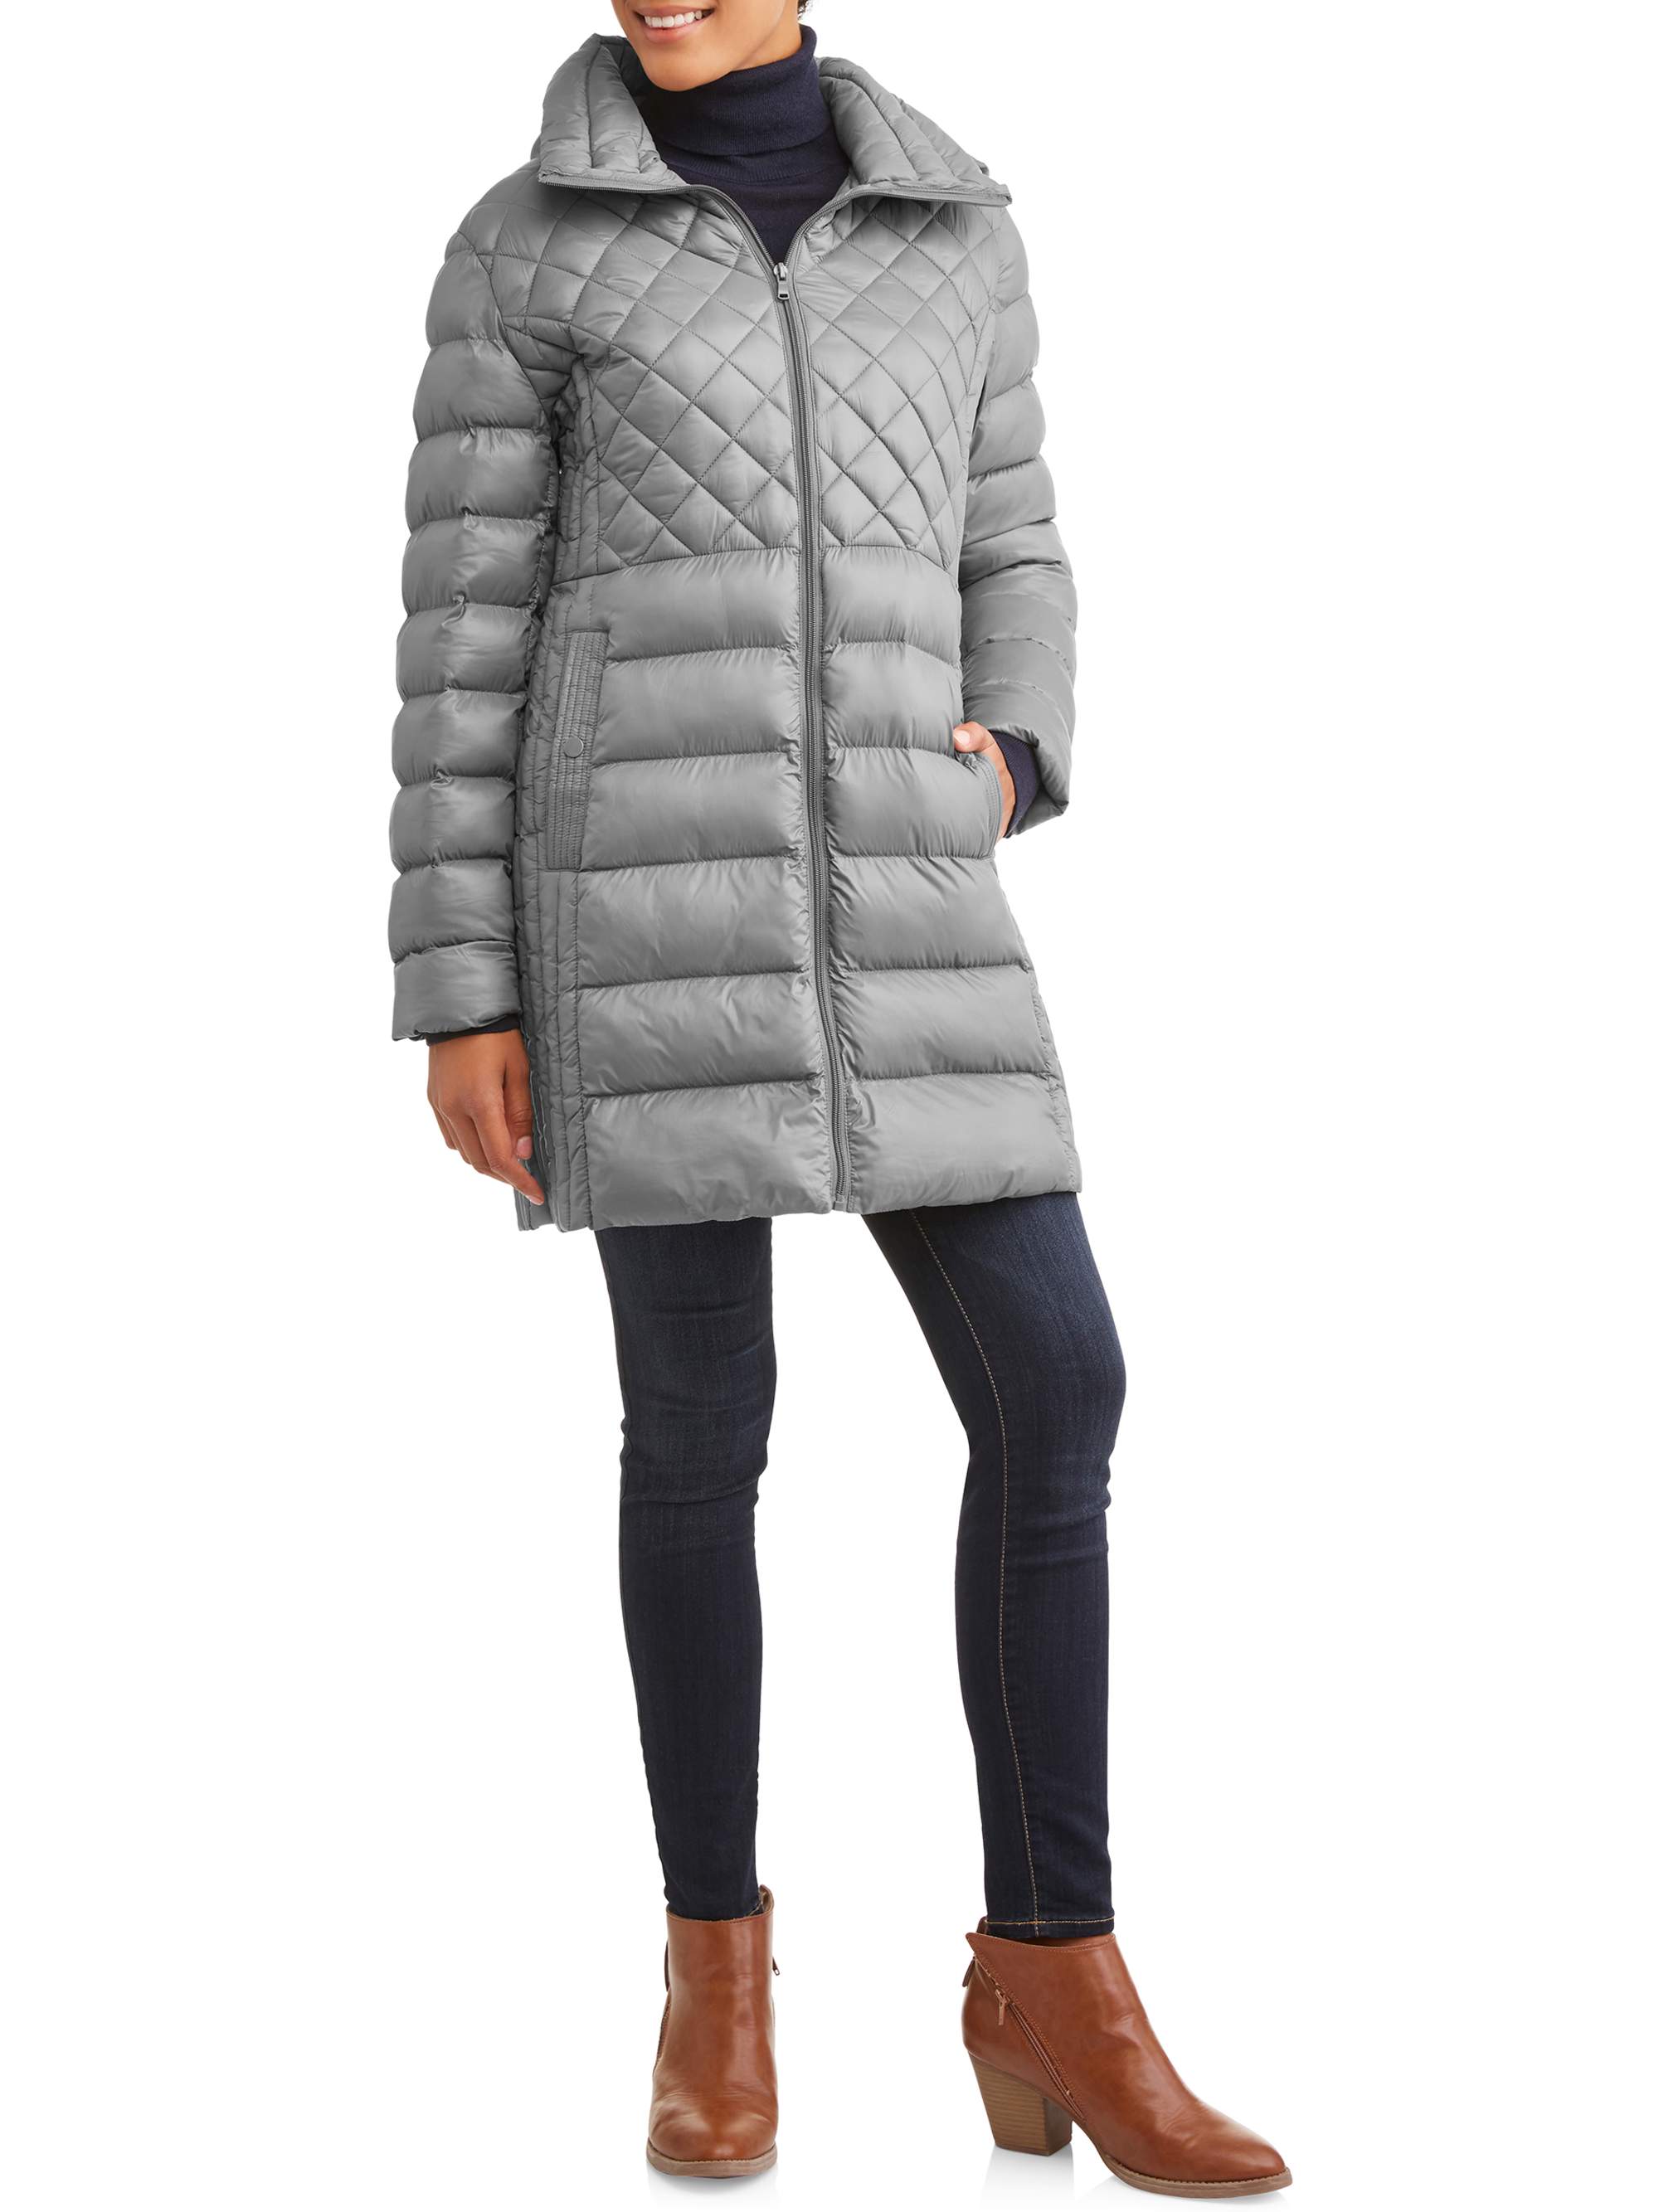 30 First Women's Quilted Puffer Jacket - image 1 of 4